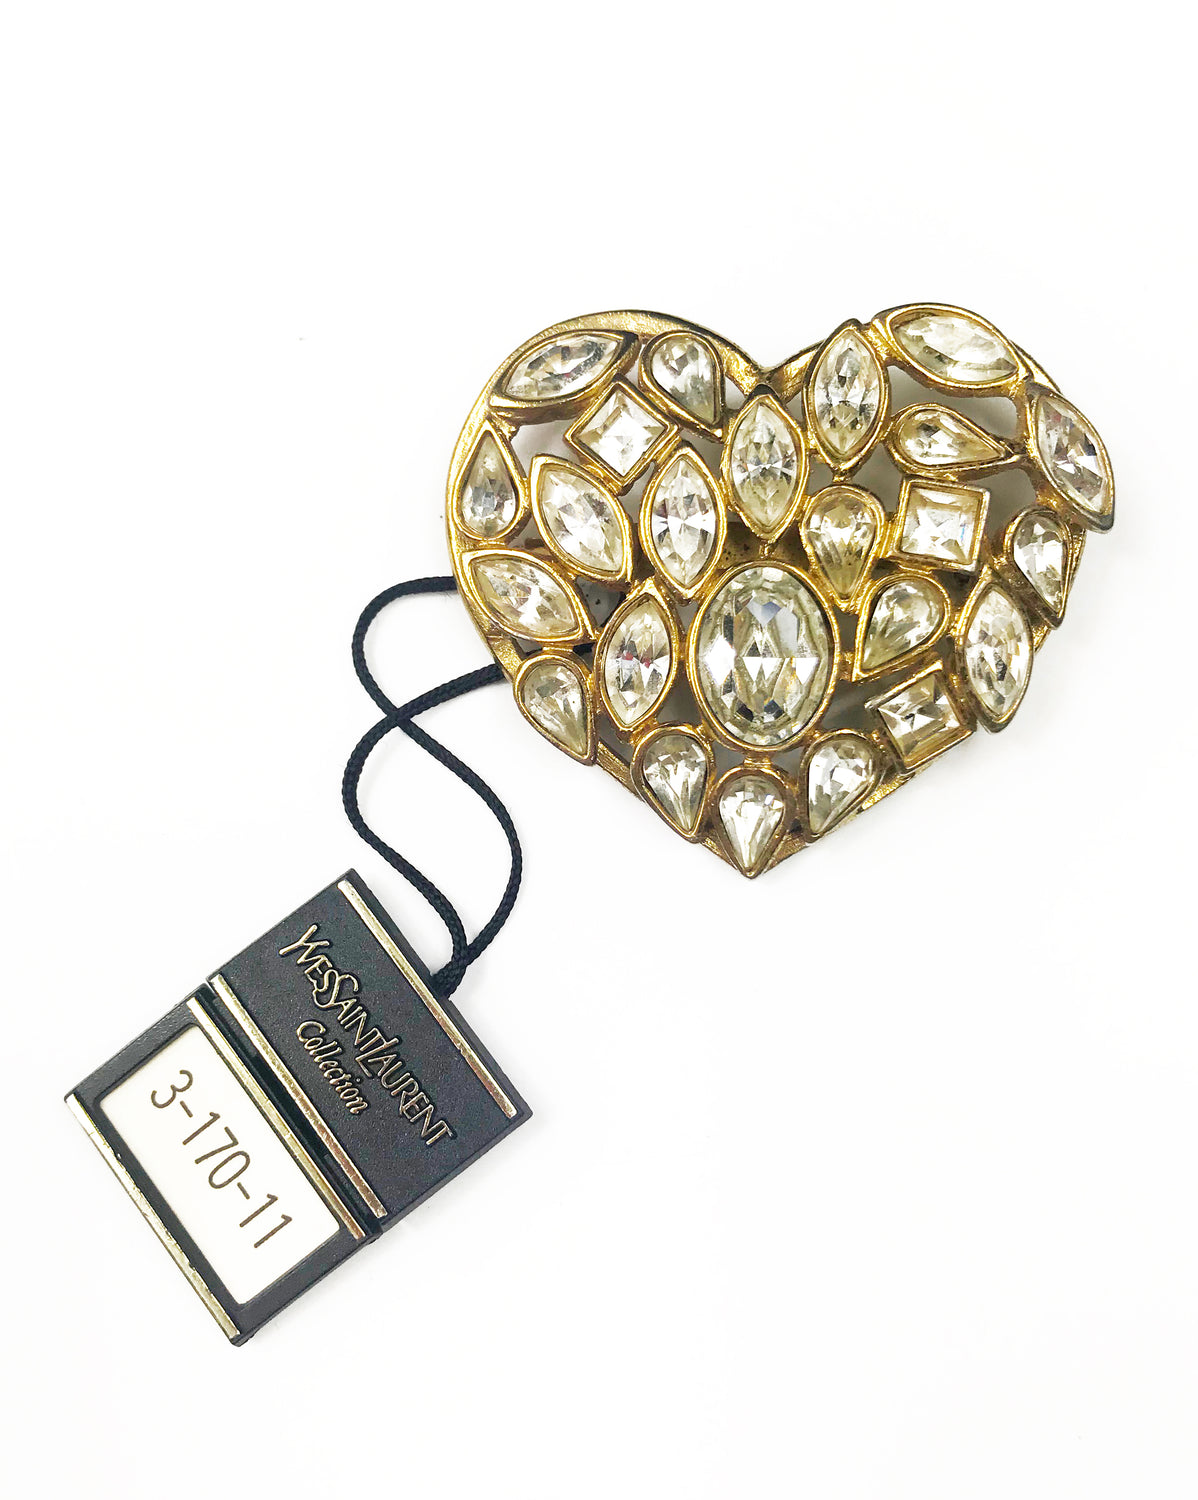 Fruit Vintage Yves Saint Laurent 1980s crystal heart brooch . Featuring in intricate crystal cluster design set in gold plated brass. YSL Pin Logo Rhinstone Diamante Clip.